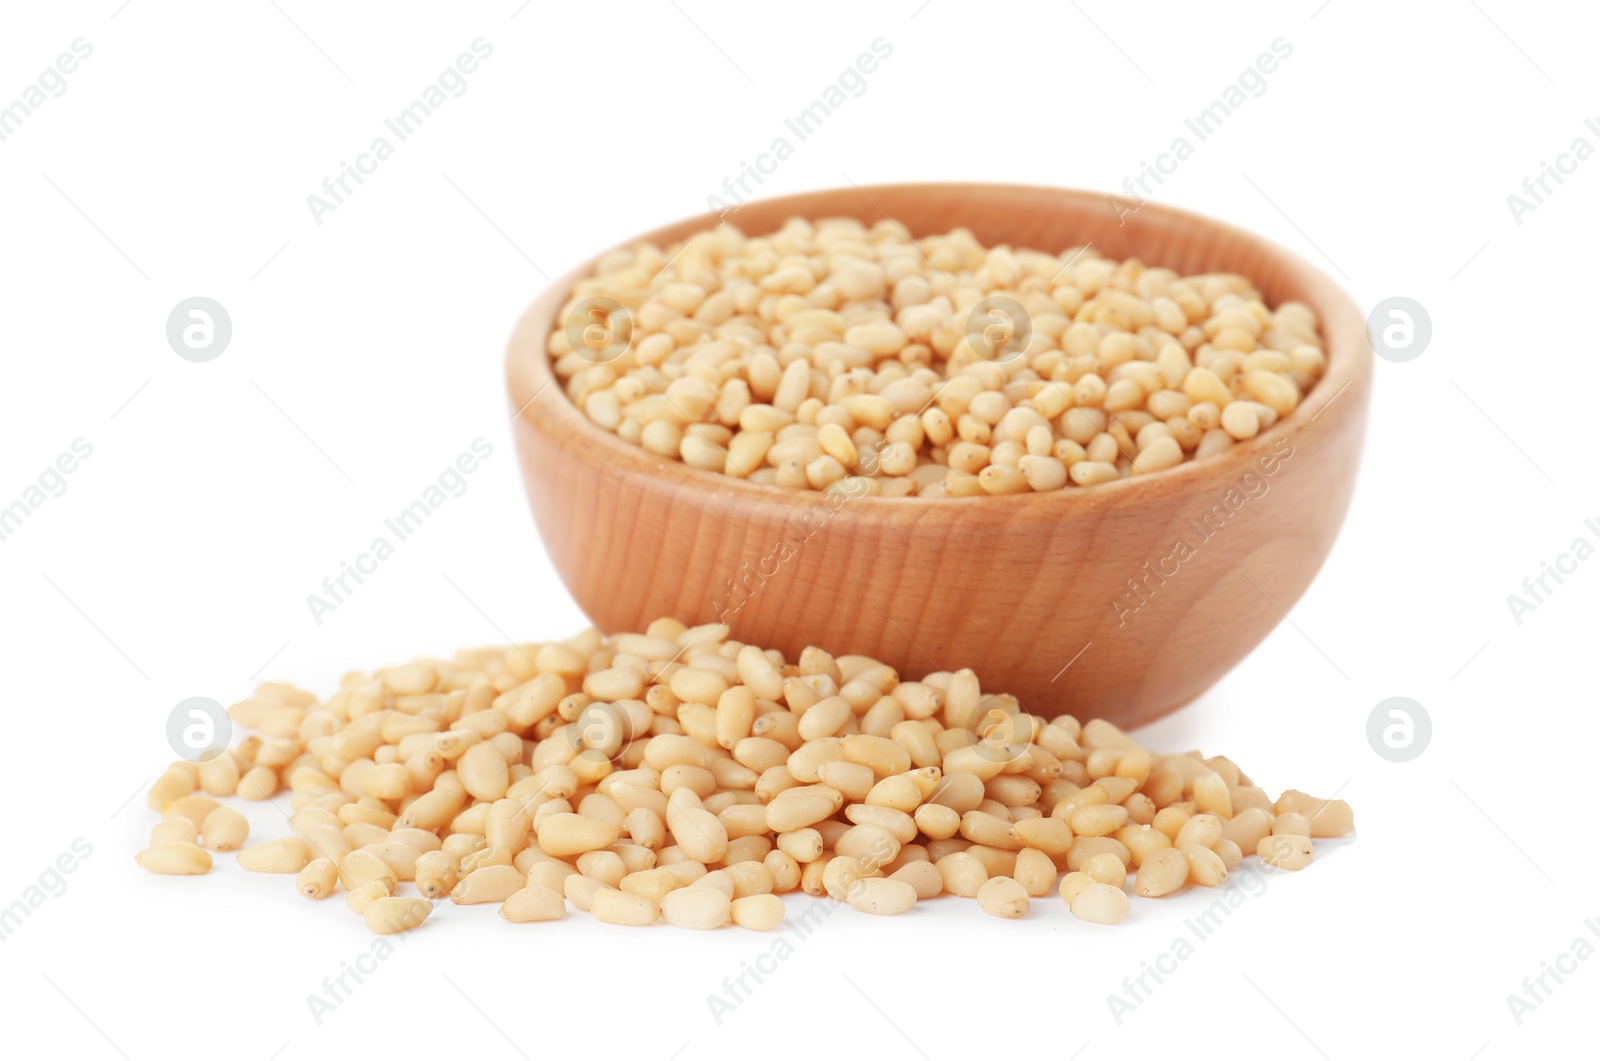 Photo of Pine nuts and bowl on white background